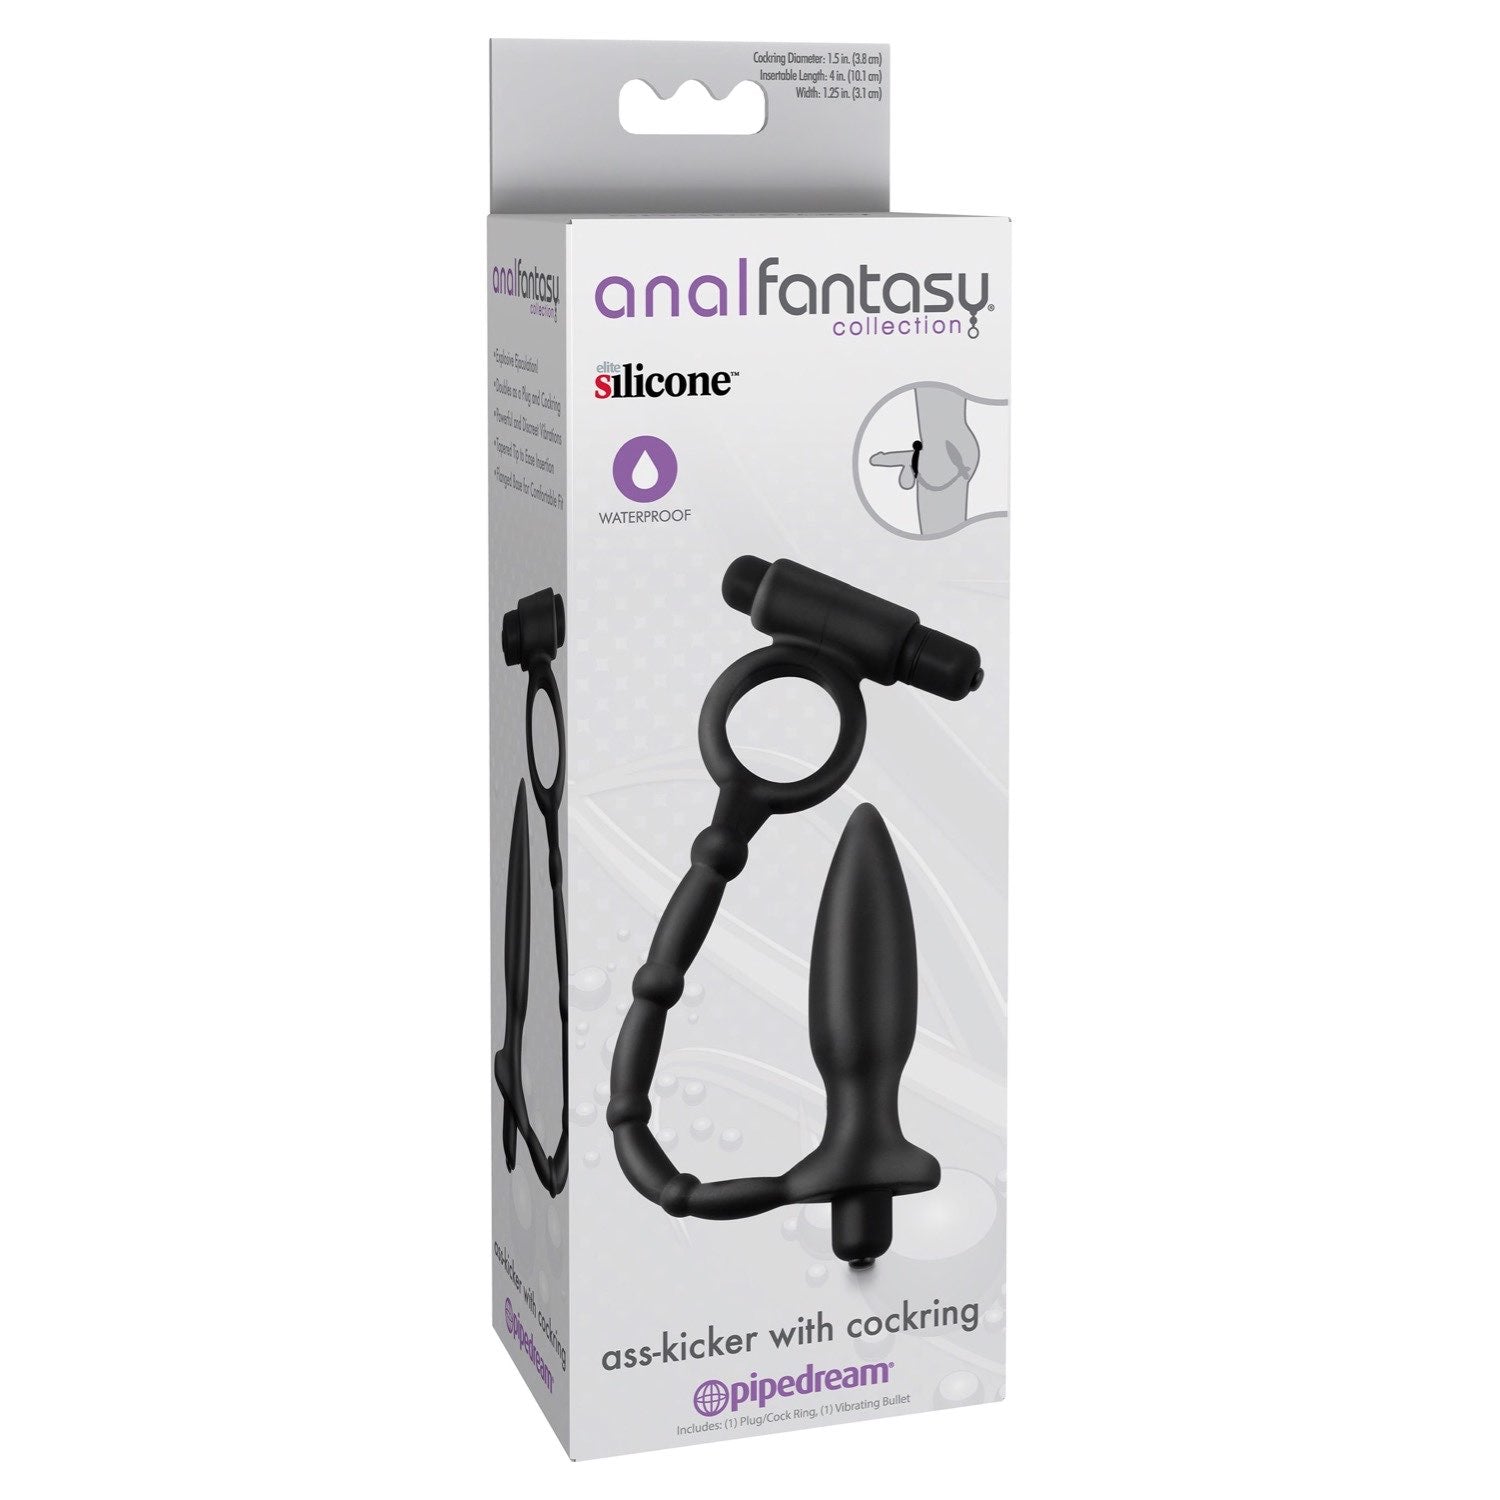 Anal Fantasy Collection Ass-Kicker With Cockring - Black 10.1 cm (4&quot;) Vibrating Butt Plug with Vibrating Cock Ring by Pipedream